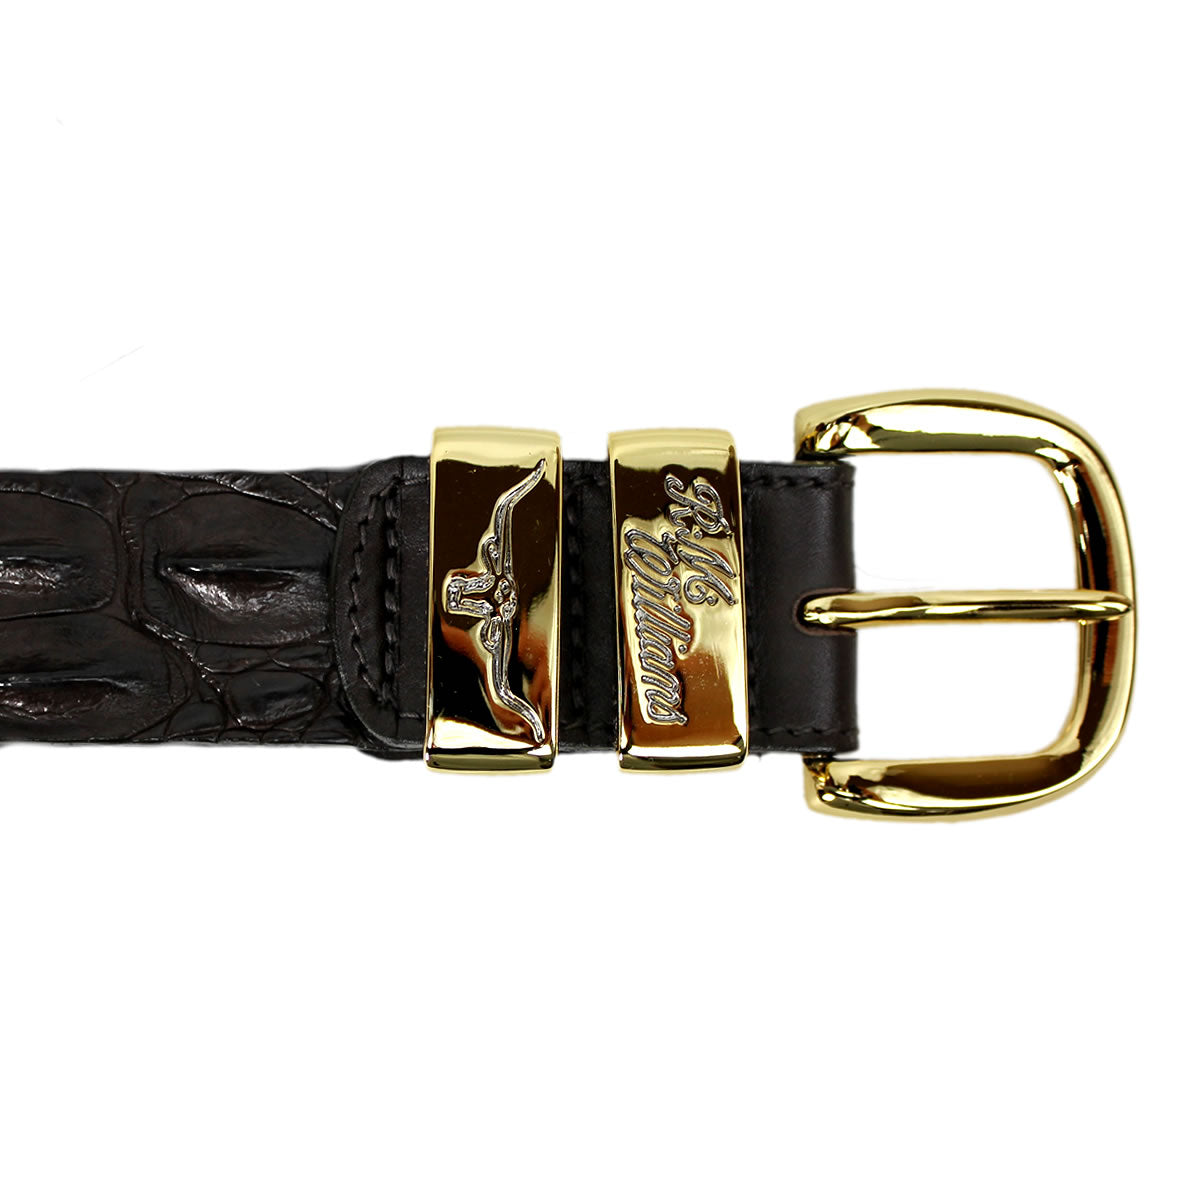 RM Williams Saltwater Crocodile 1.5 Belt - Mens from Humes Outfitters